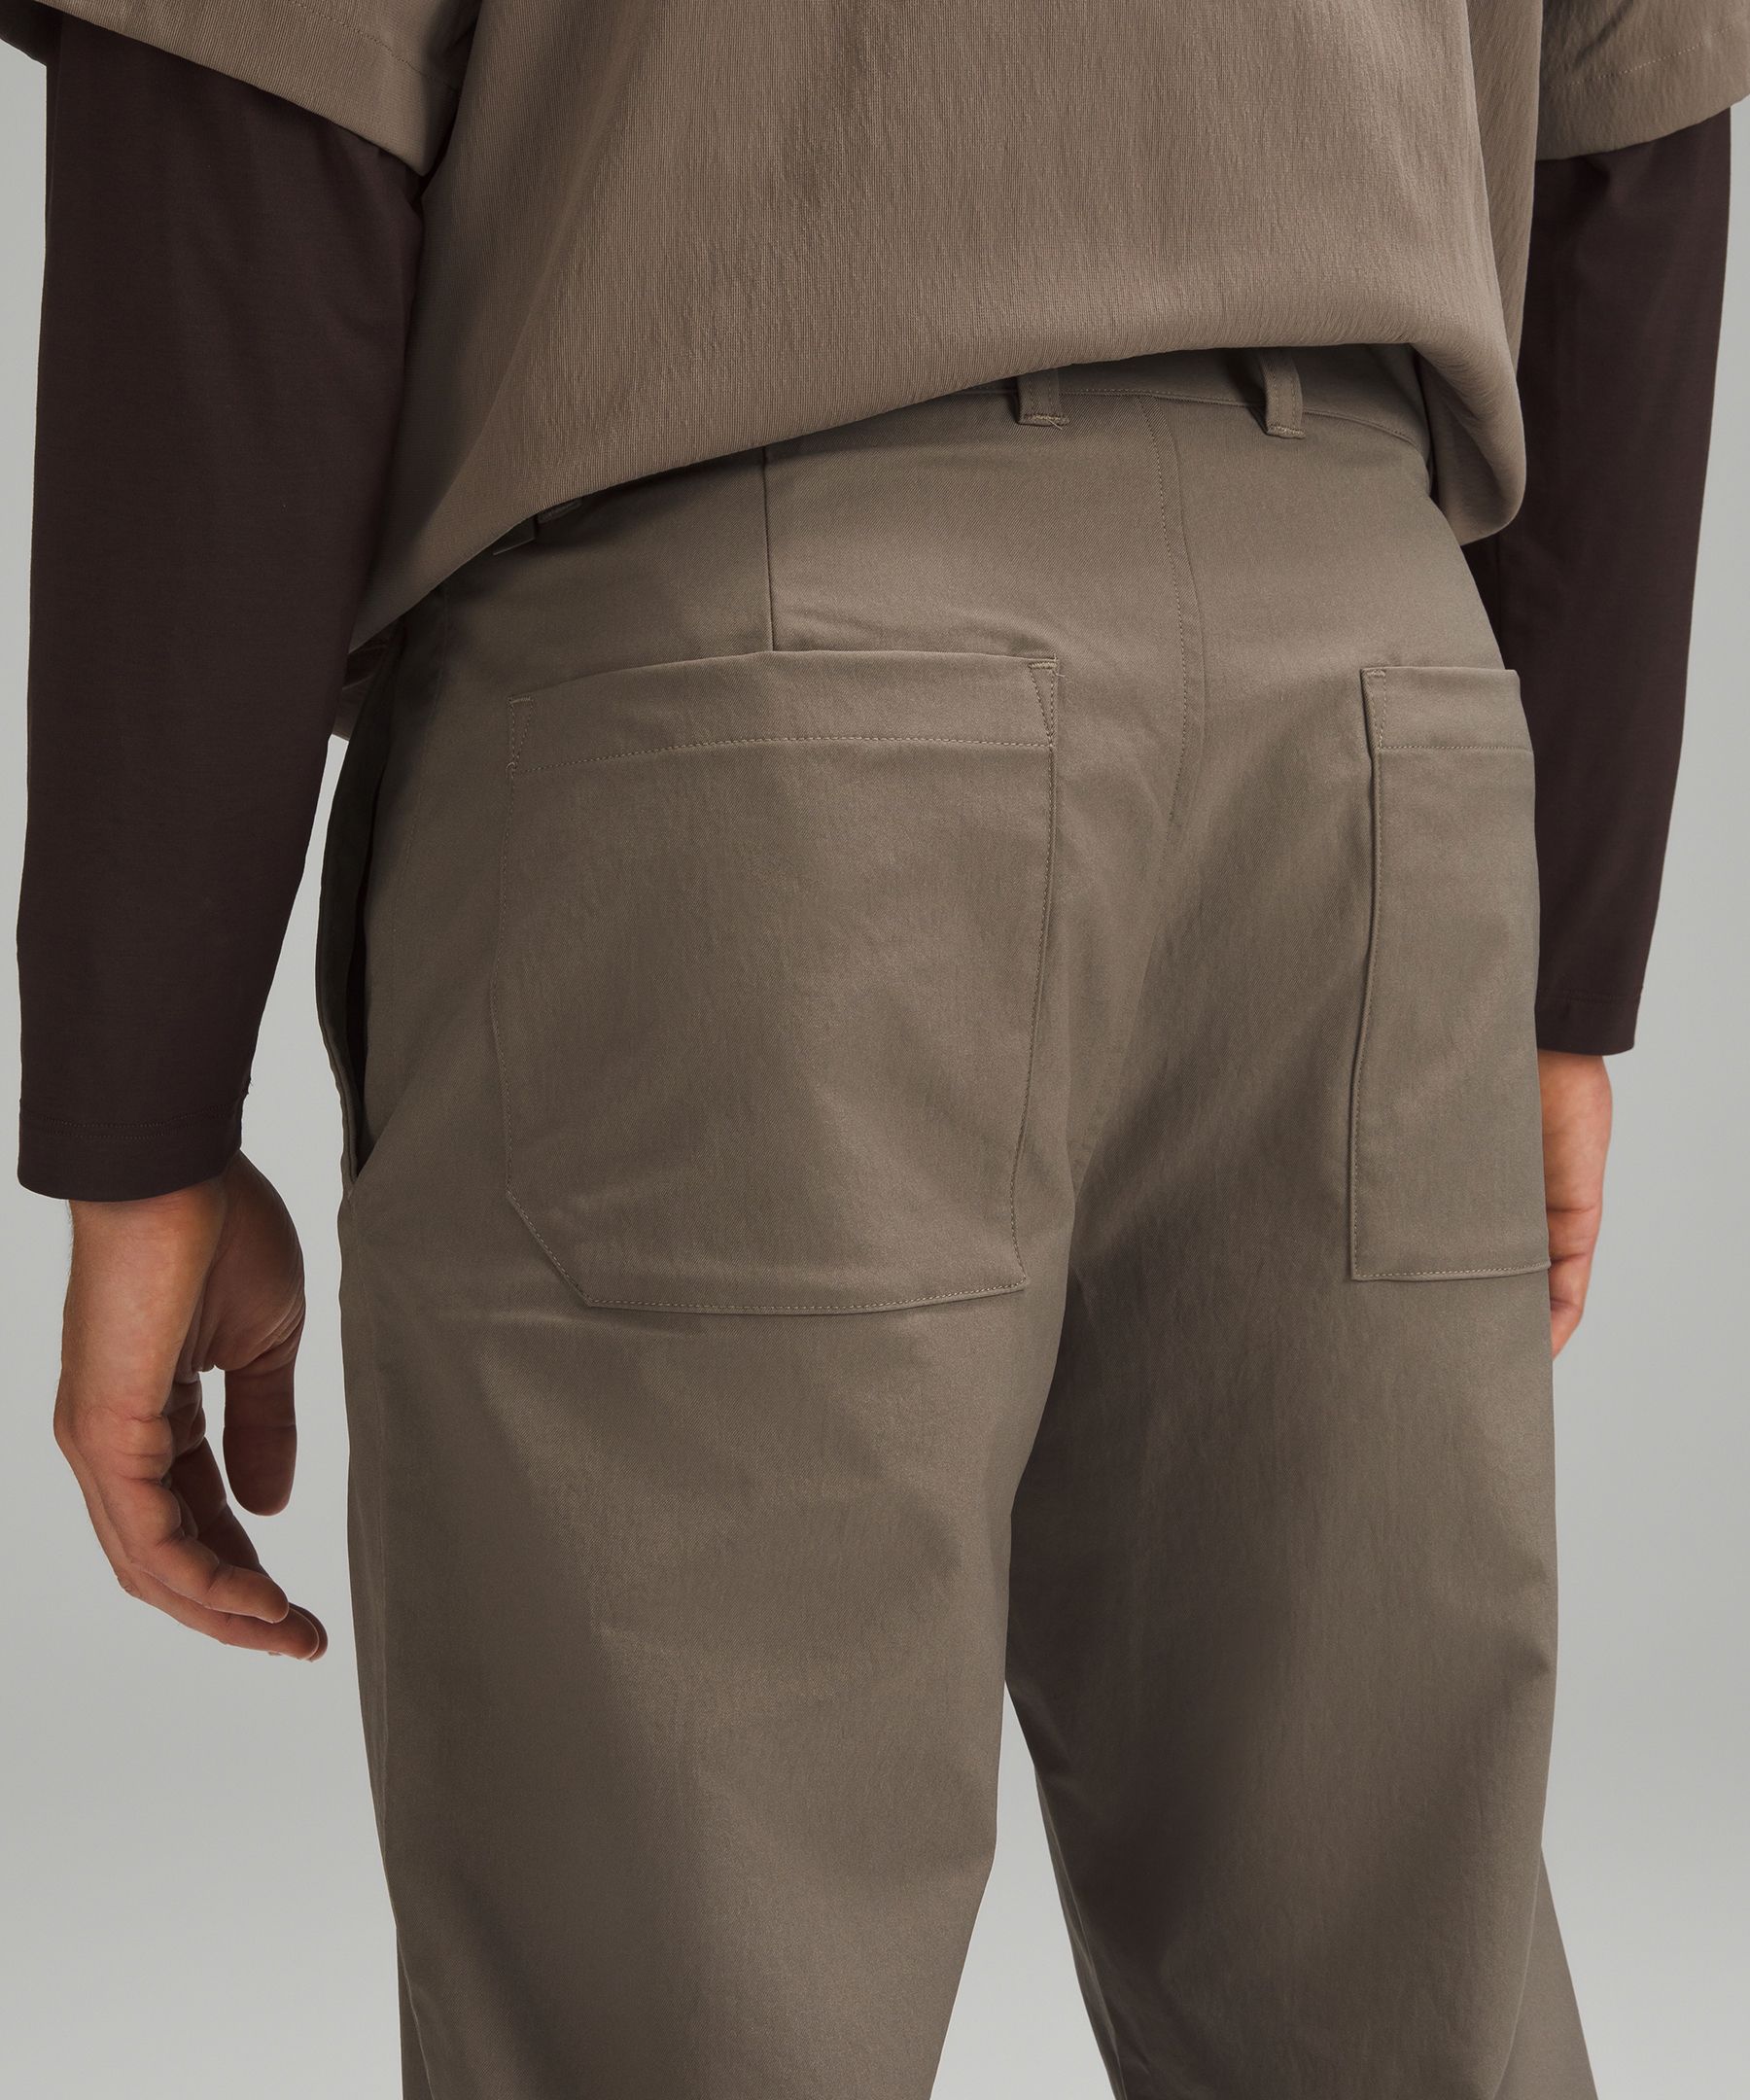 Relaxed-Tapered Twill Trouser, Men's Trousers